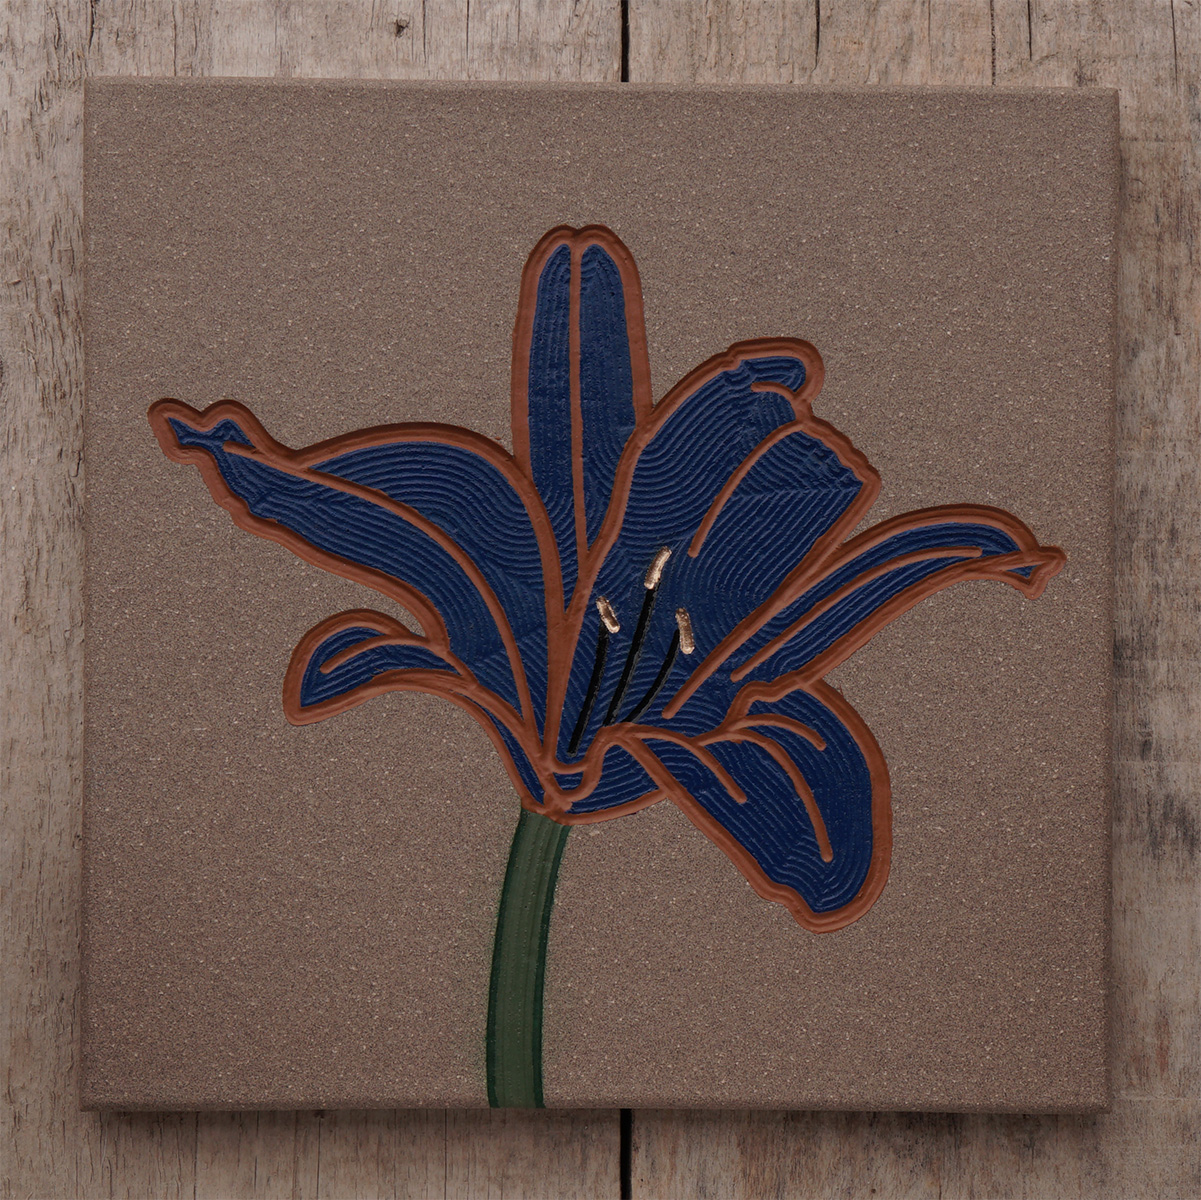 Engraving: Blue Lily